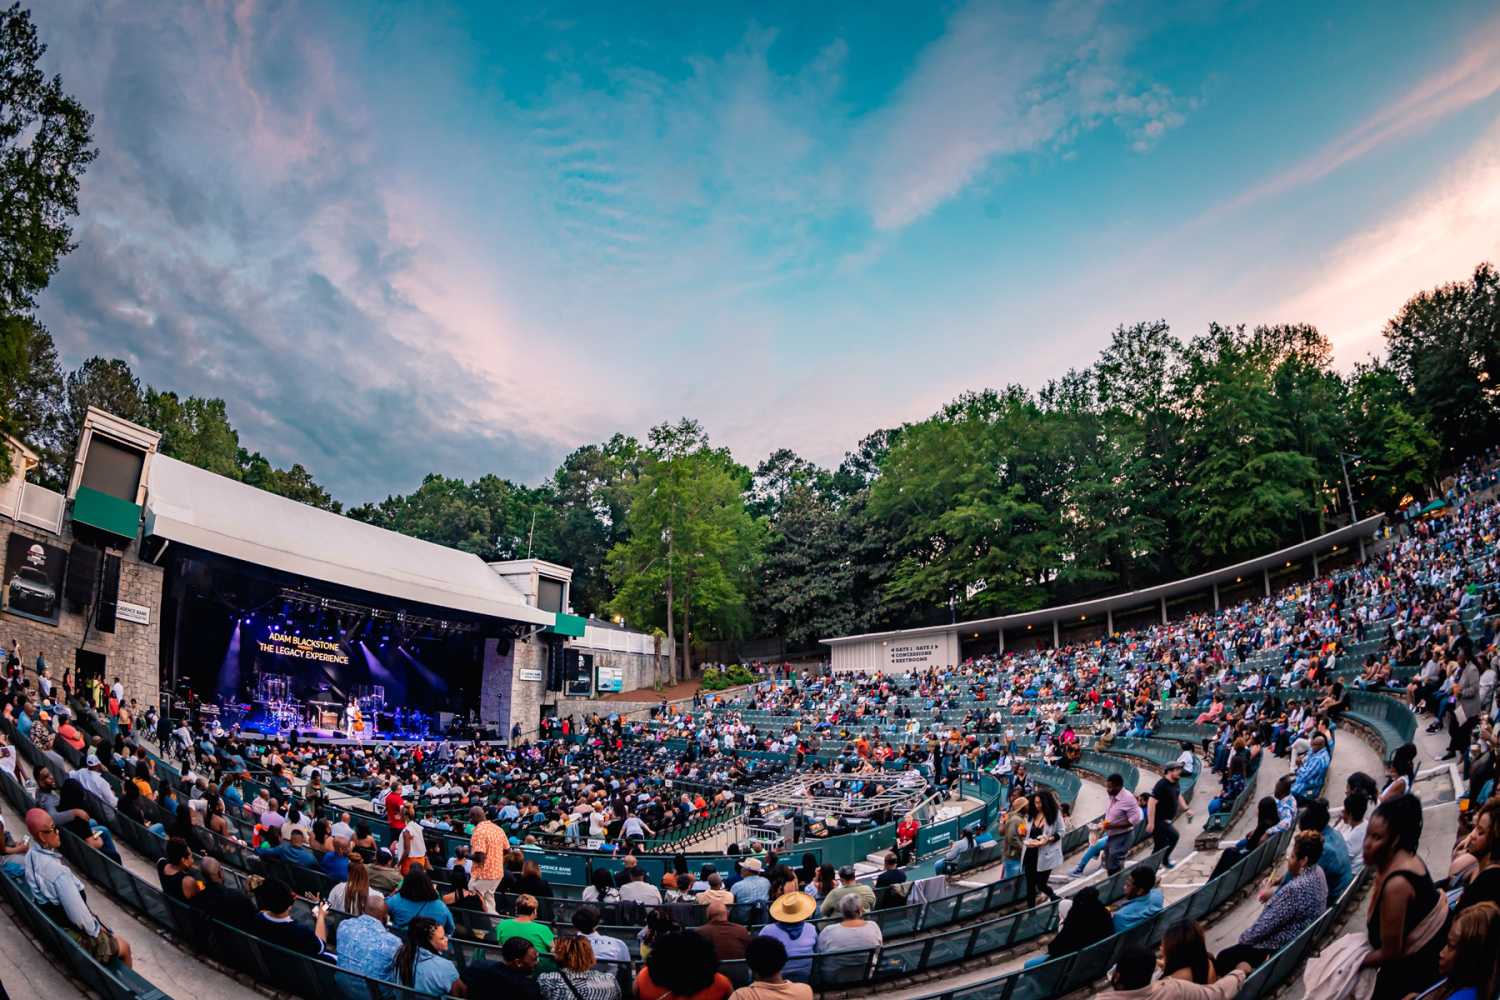 The Cadence Bank Amphitheatre in North Atlanta’s Chastain Park